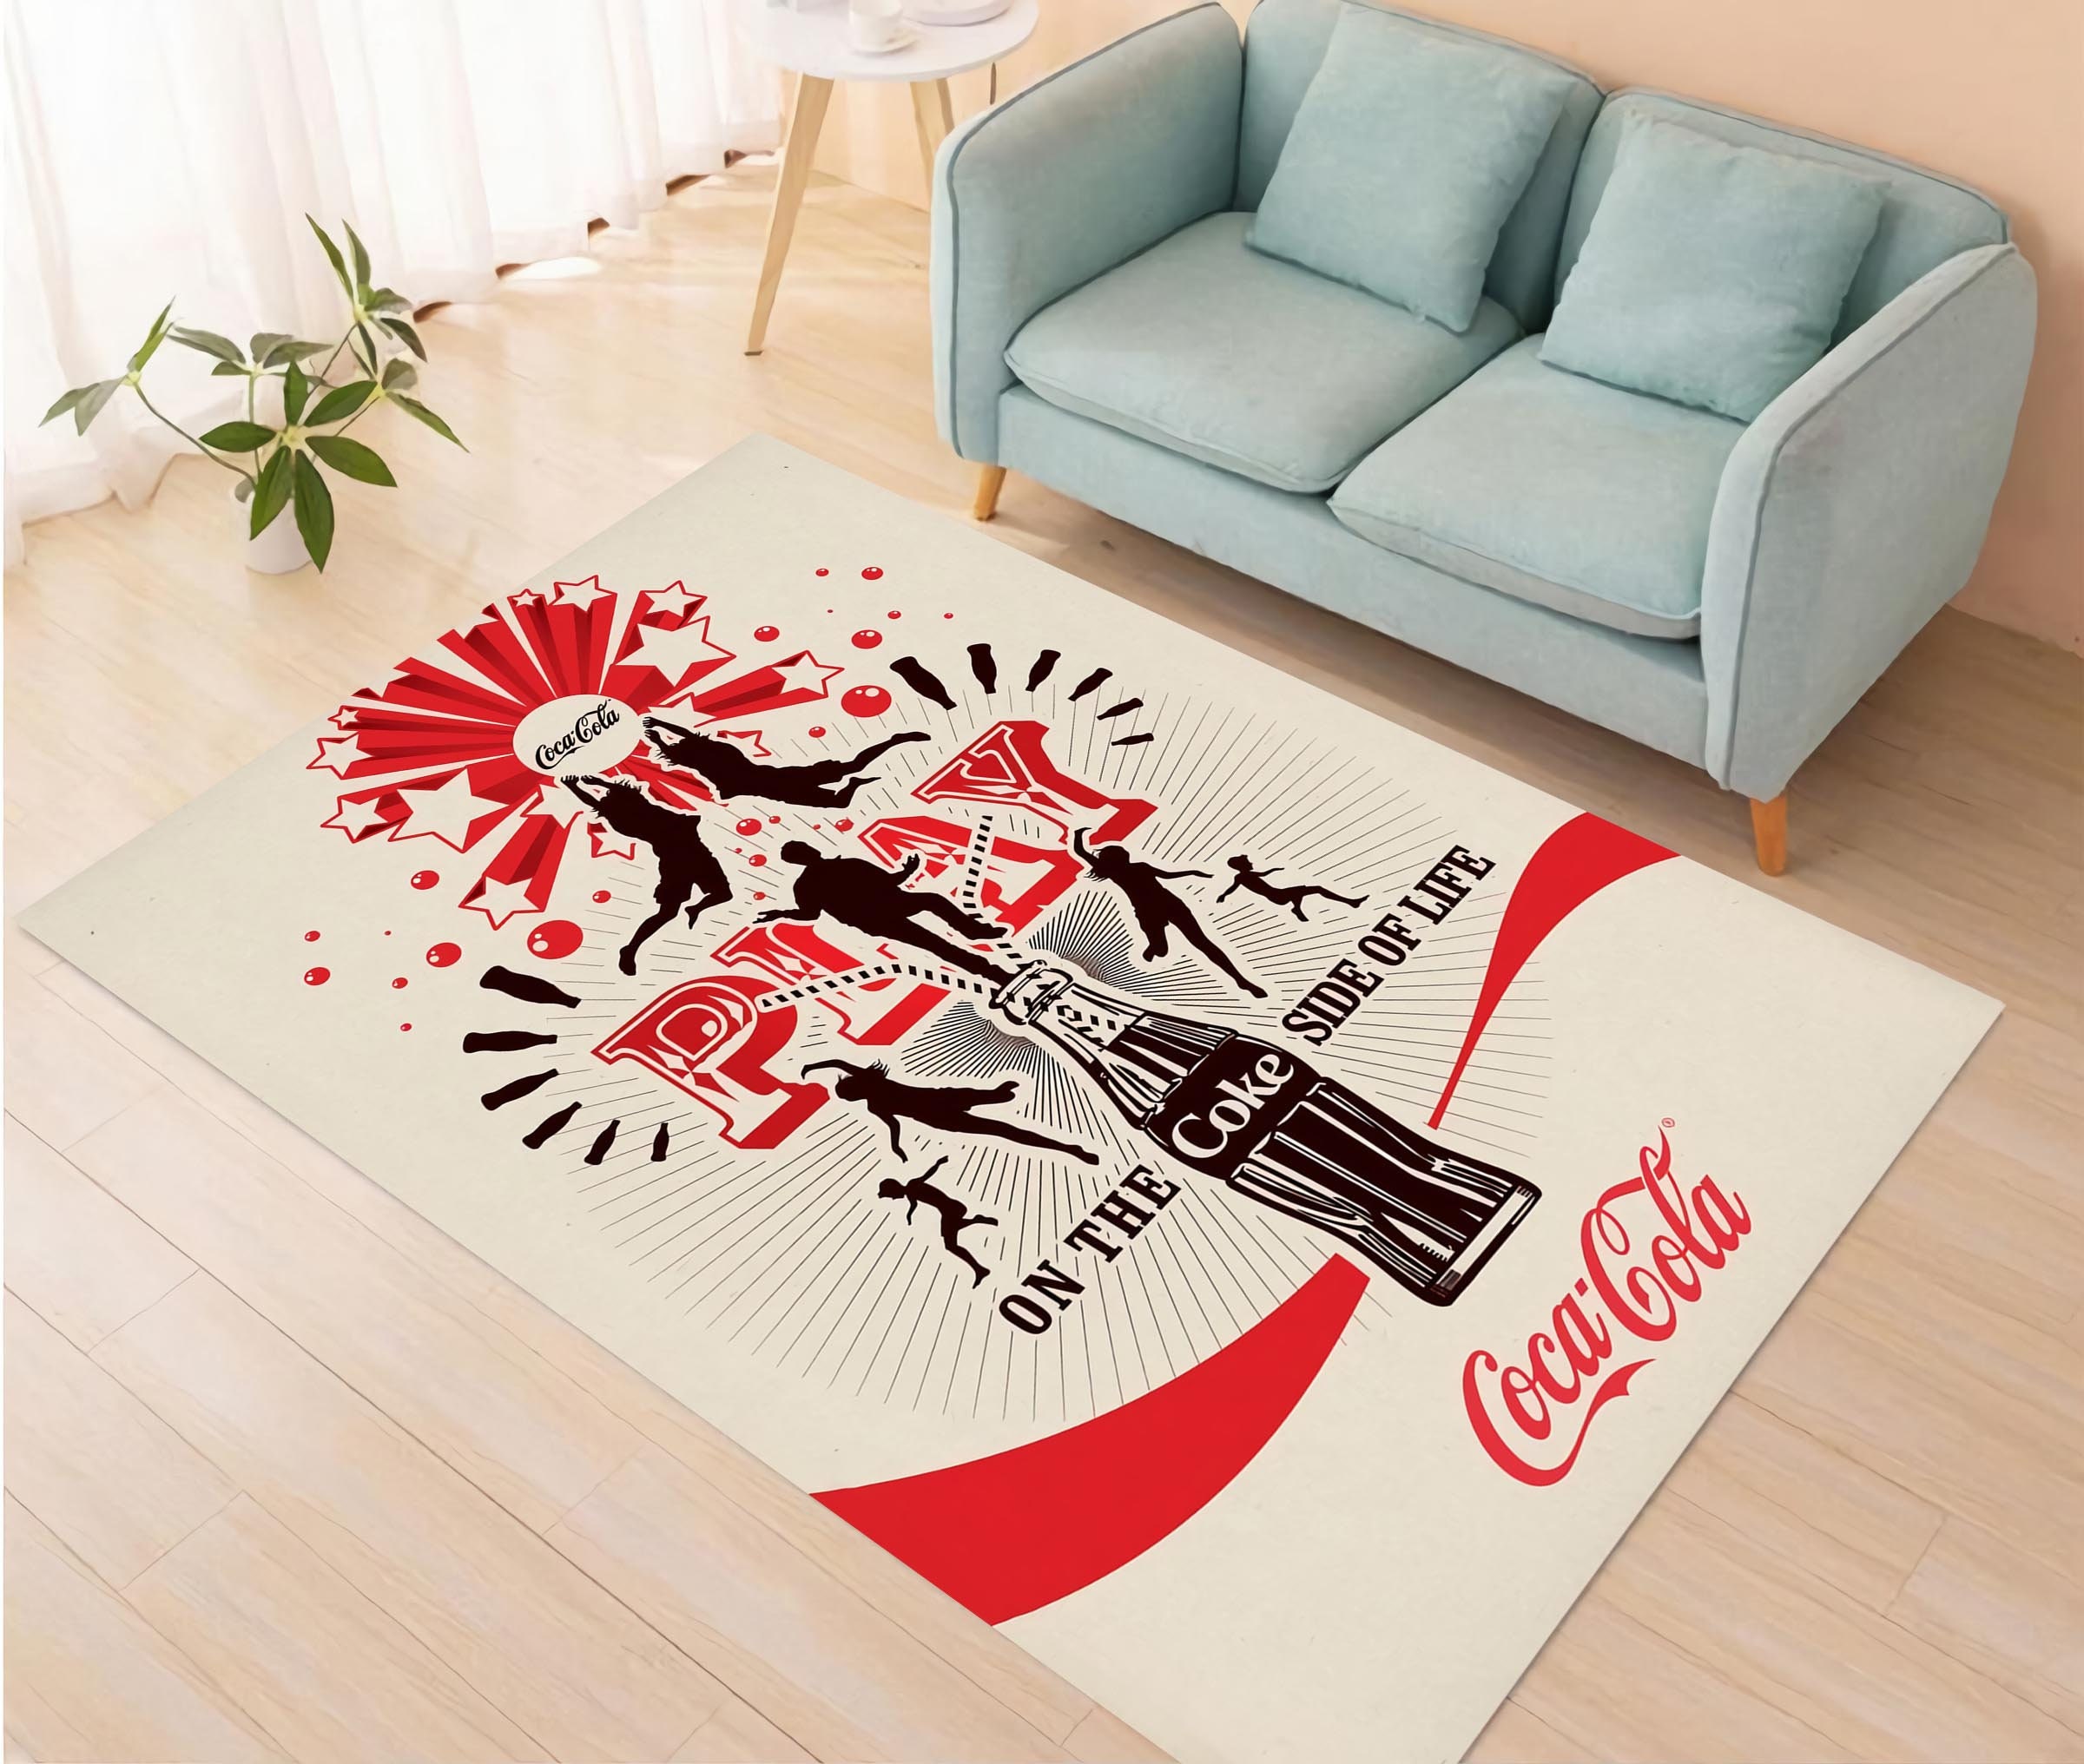 Coca Cola Rug, Gray Rug, Rugs for Living Room, Personalized